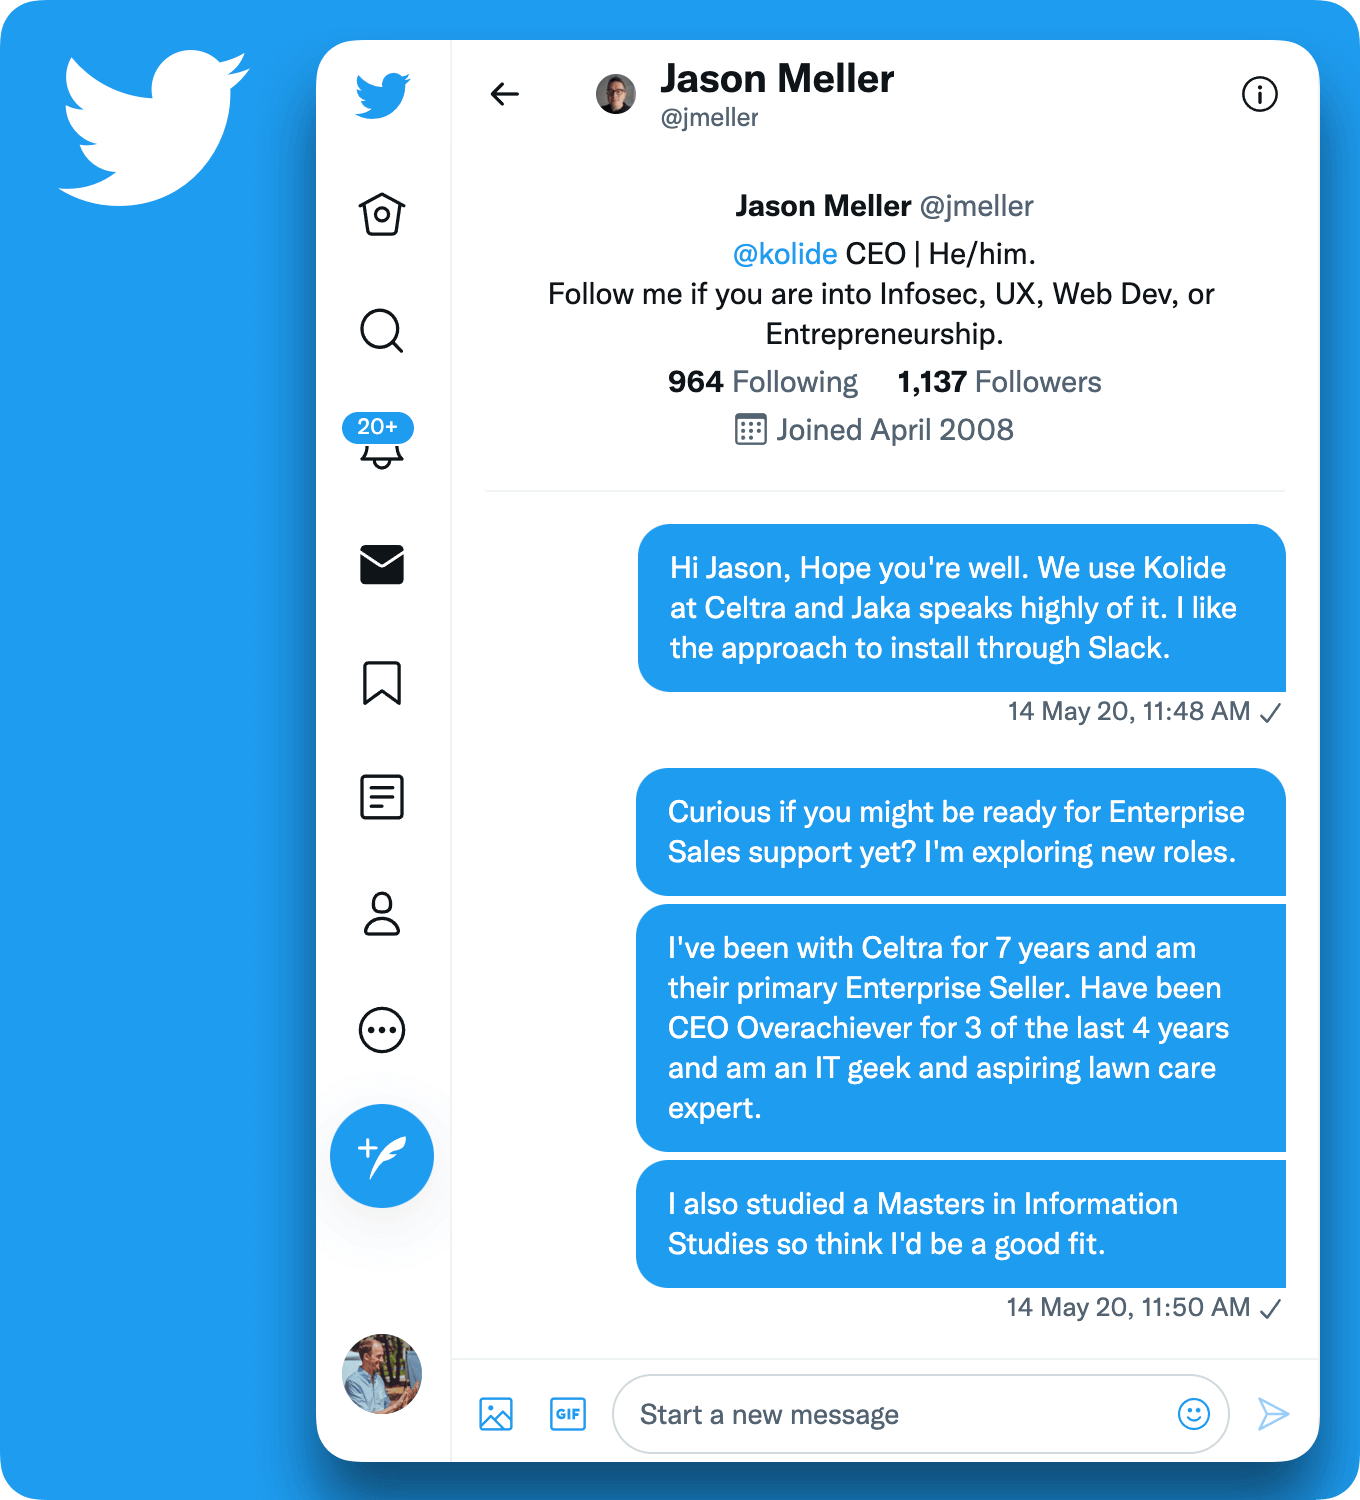 A screenshot of a Twitter DM between Harry and Jason Meller. Harry's messages read: Hi Jason, hope you're well. We use Kolide at Celtra and Jaka speaks highly of it. I like the approach to install through Slack. Curious if you might be in need for Enterprise Sales support yet? I'm exploring new roles. I've been with Celtra for 7 years and I am their primary Enterprise Seller. Have been CEO Overachiever for 3 of the last 4 years and I am an IT geek and aspiring lawn care expert. I also studied a Masters in Information Studies so think I'd be a good fit.